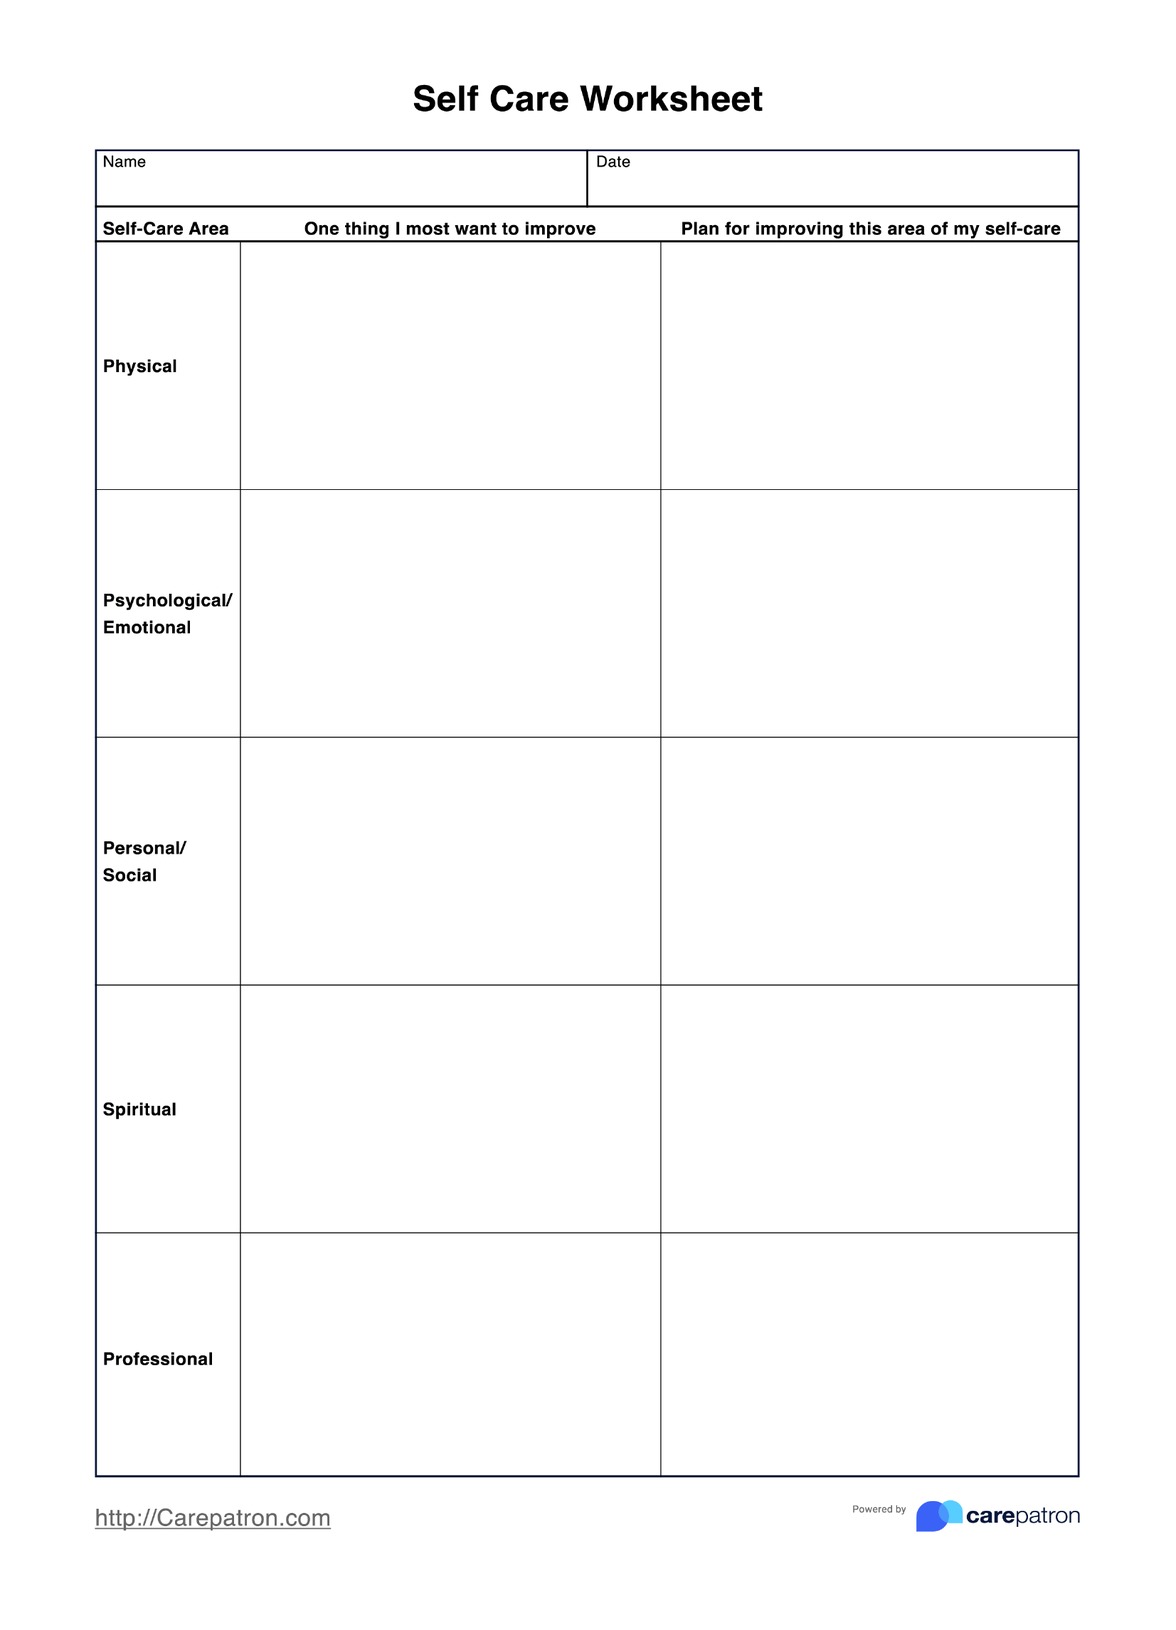 Self Care Worksheets PDF Example